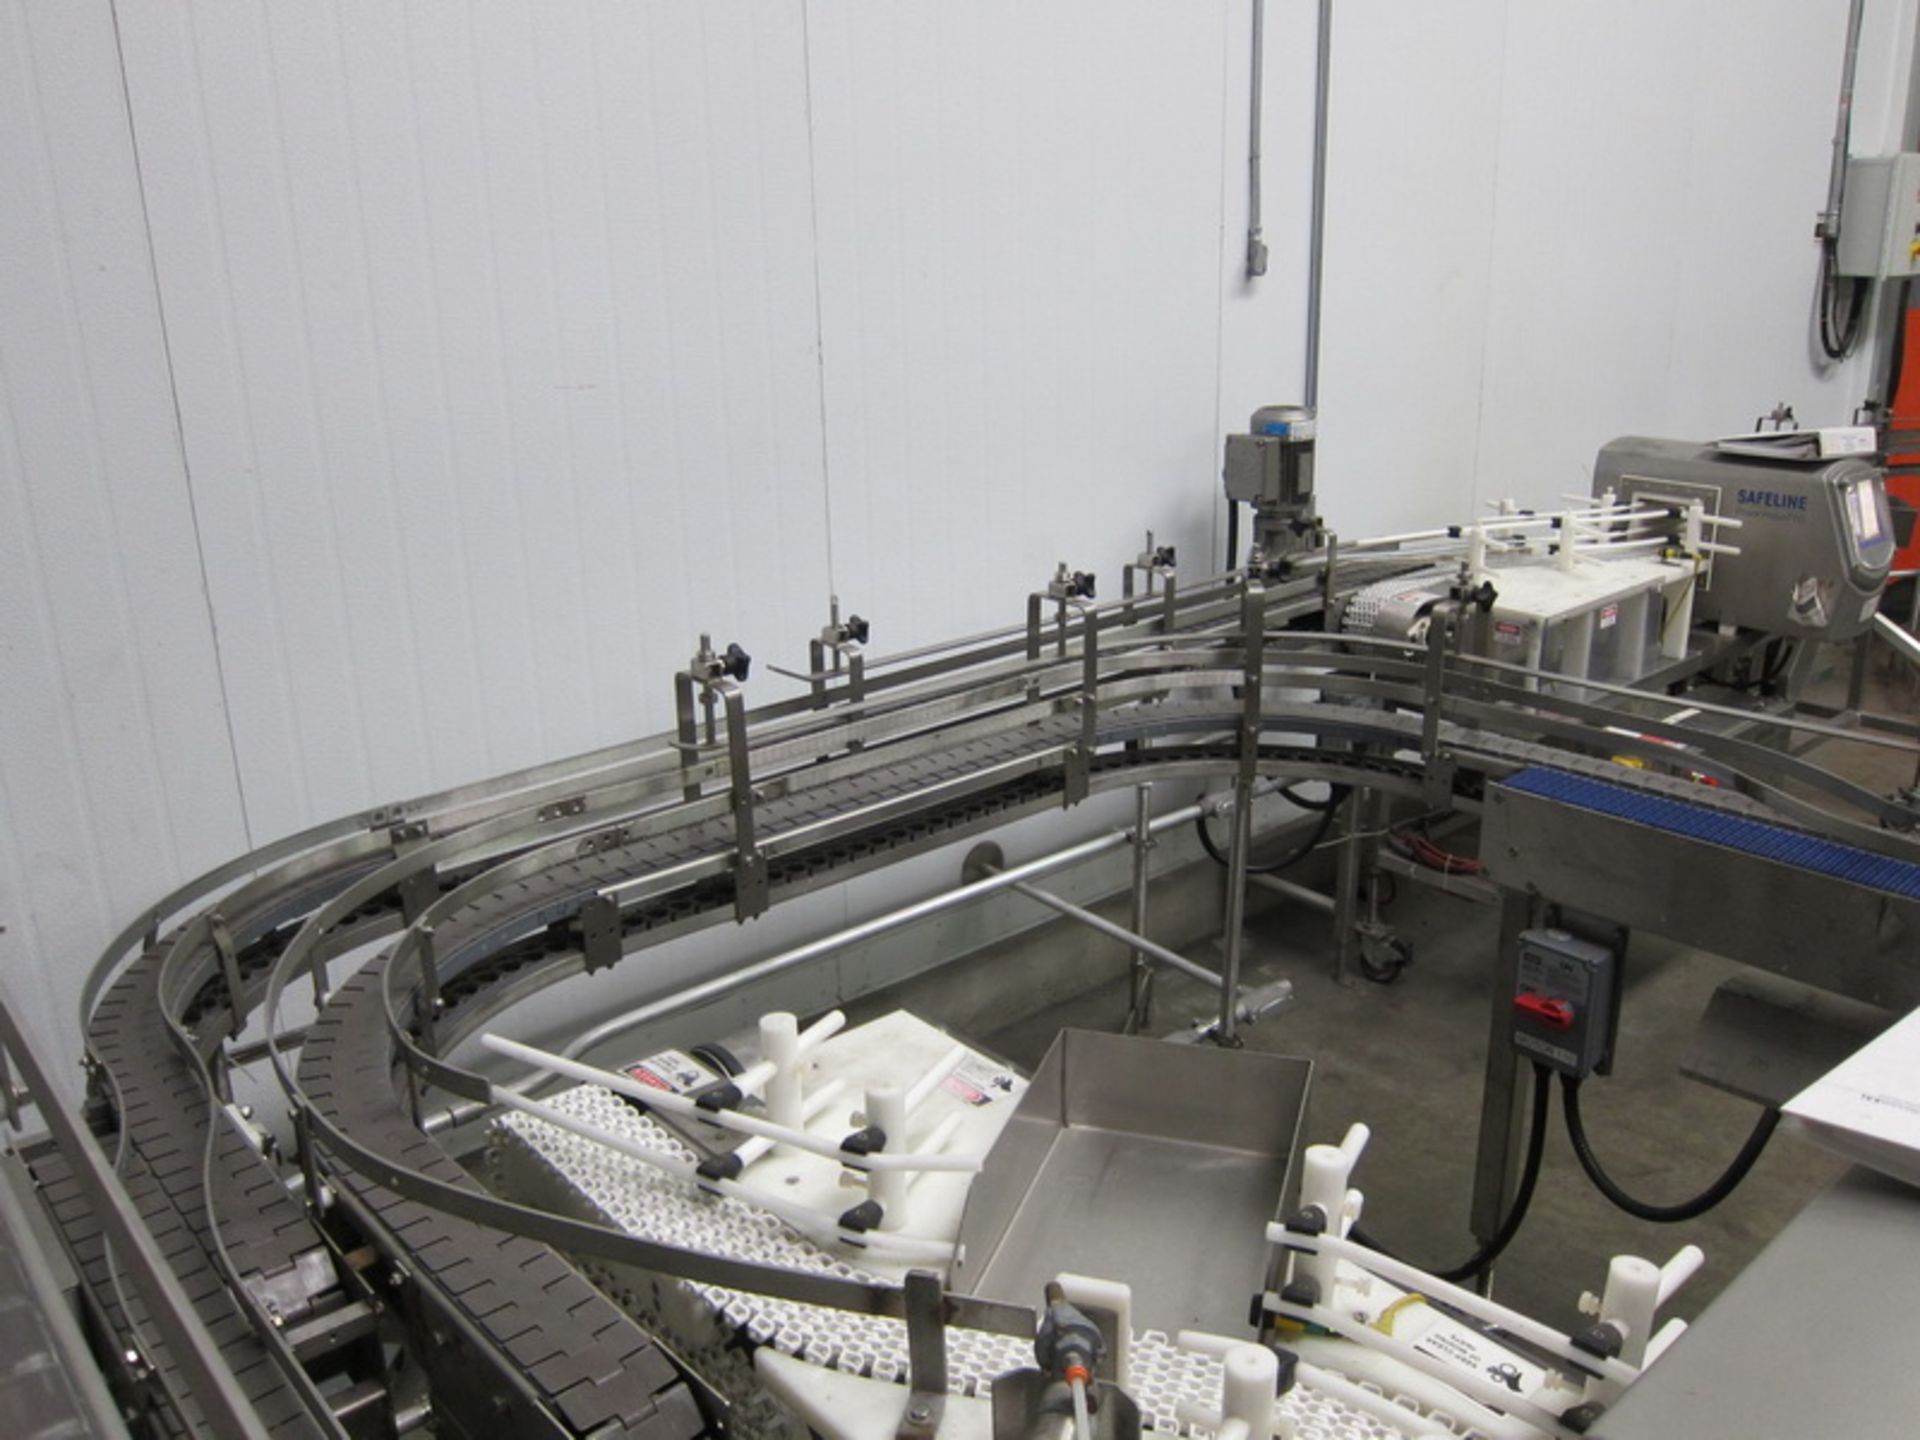 [Lot] Dairy Conveyor Corp. table top conveyors, extending from filling room to checkweigh in tray - Image 7 of 8